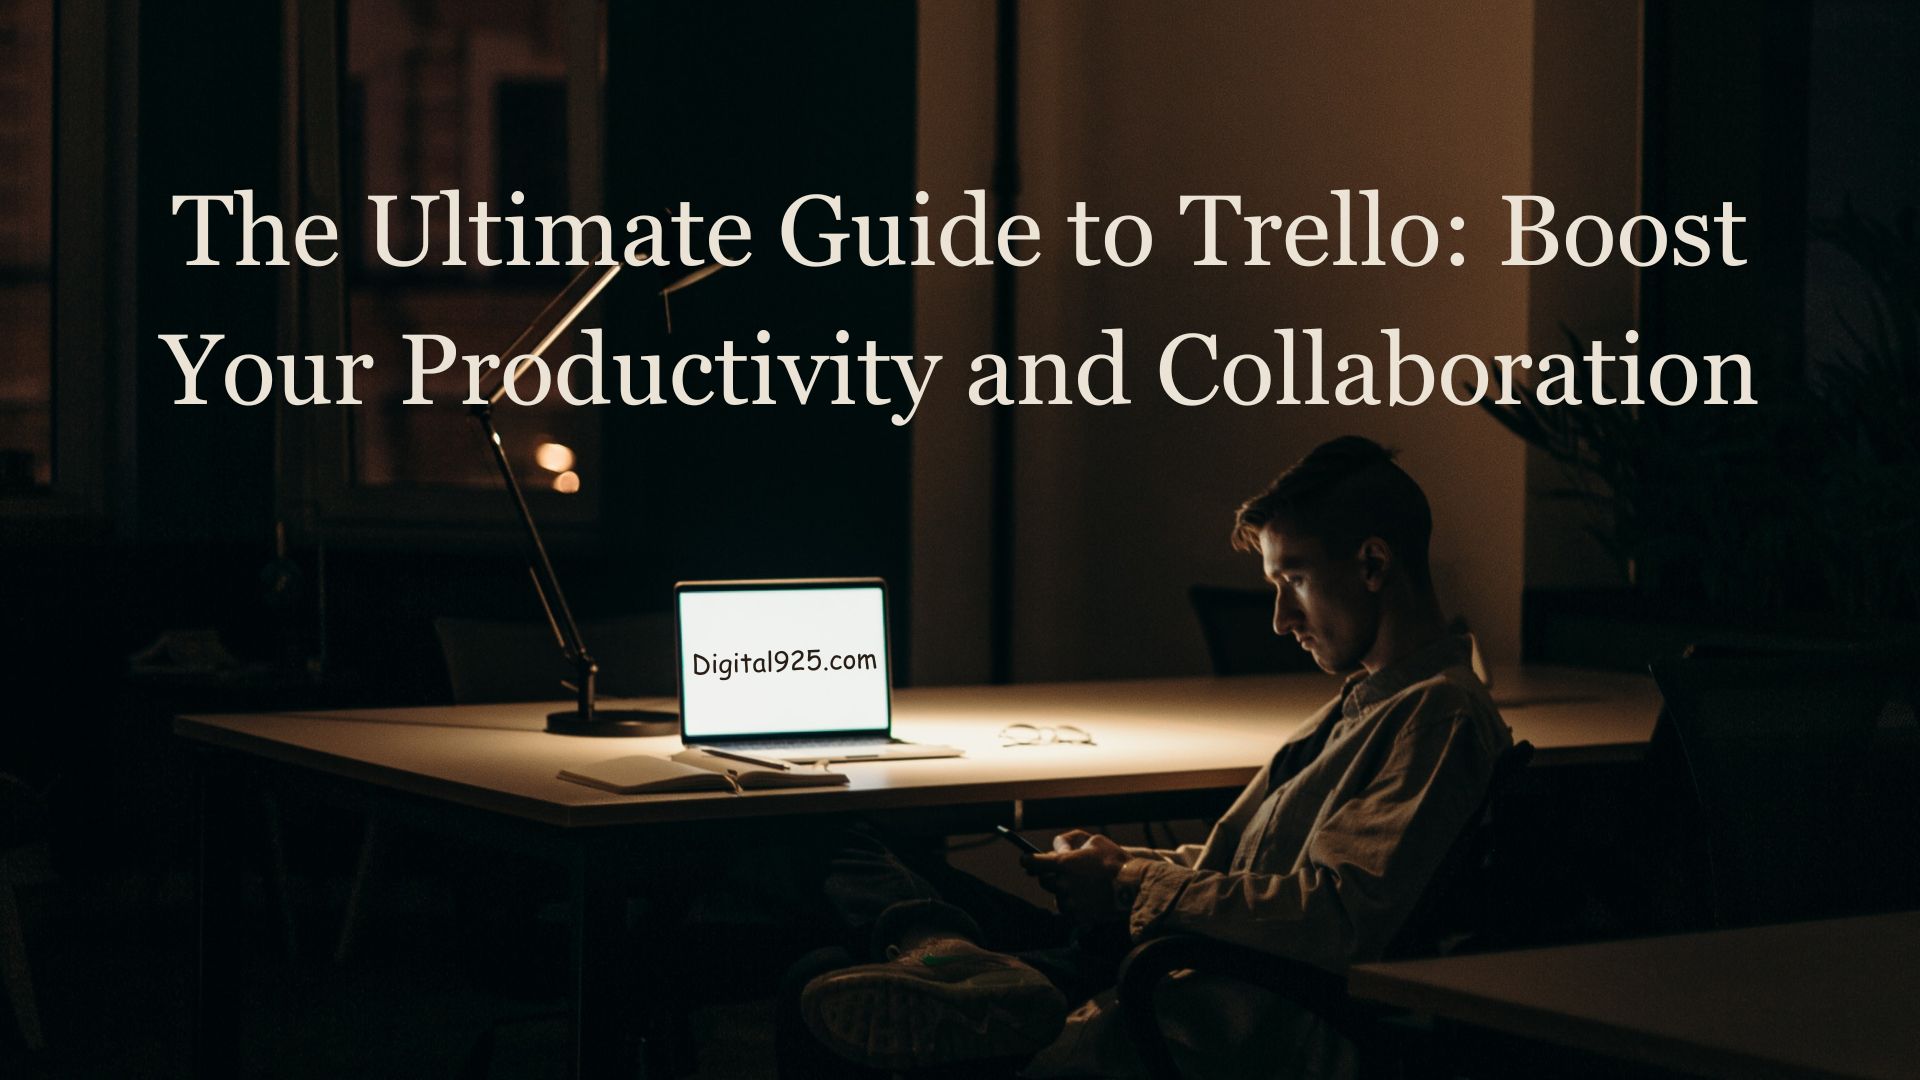 The Ultimate Guide to Trello: Boost Your Productivity and Collaboration